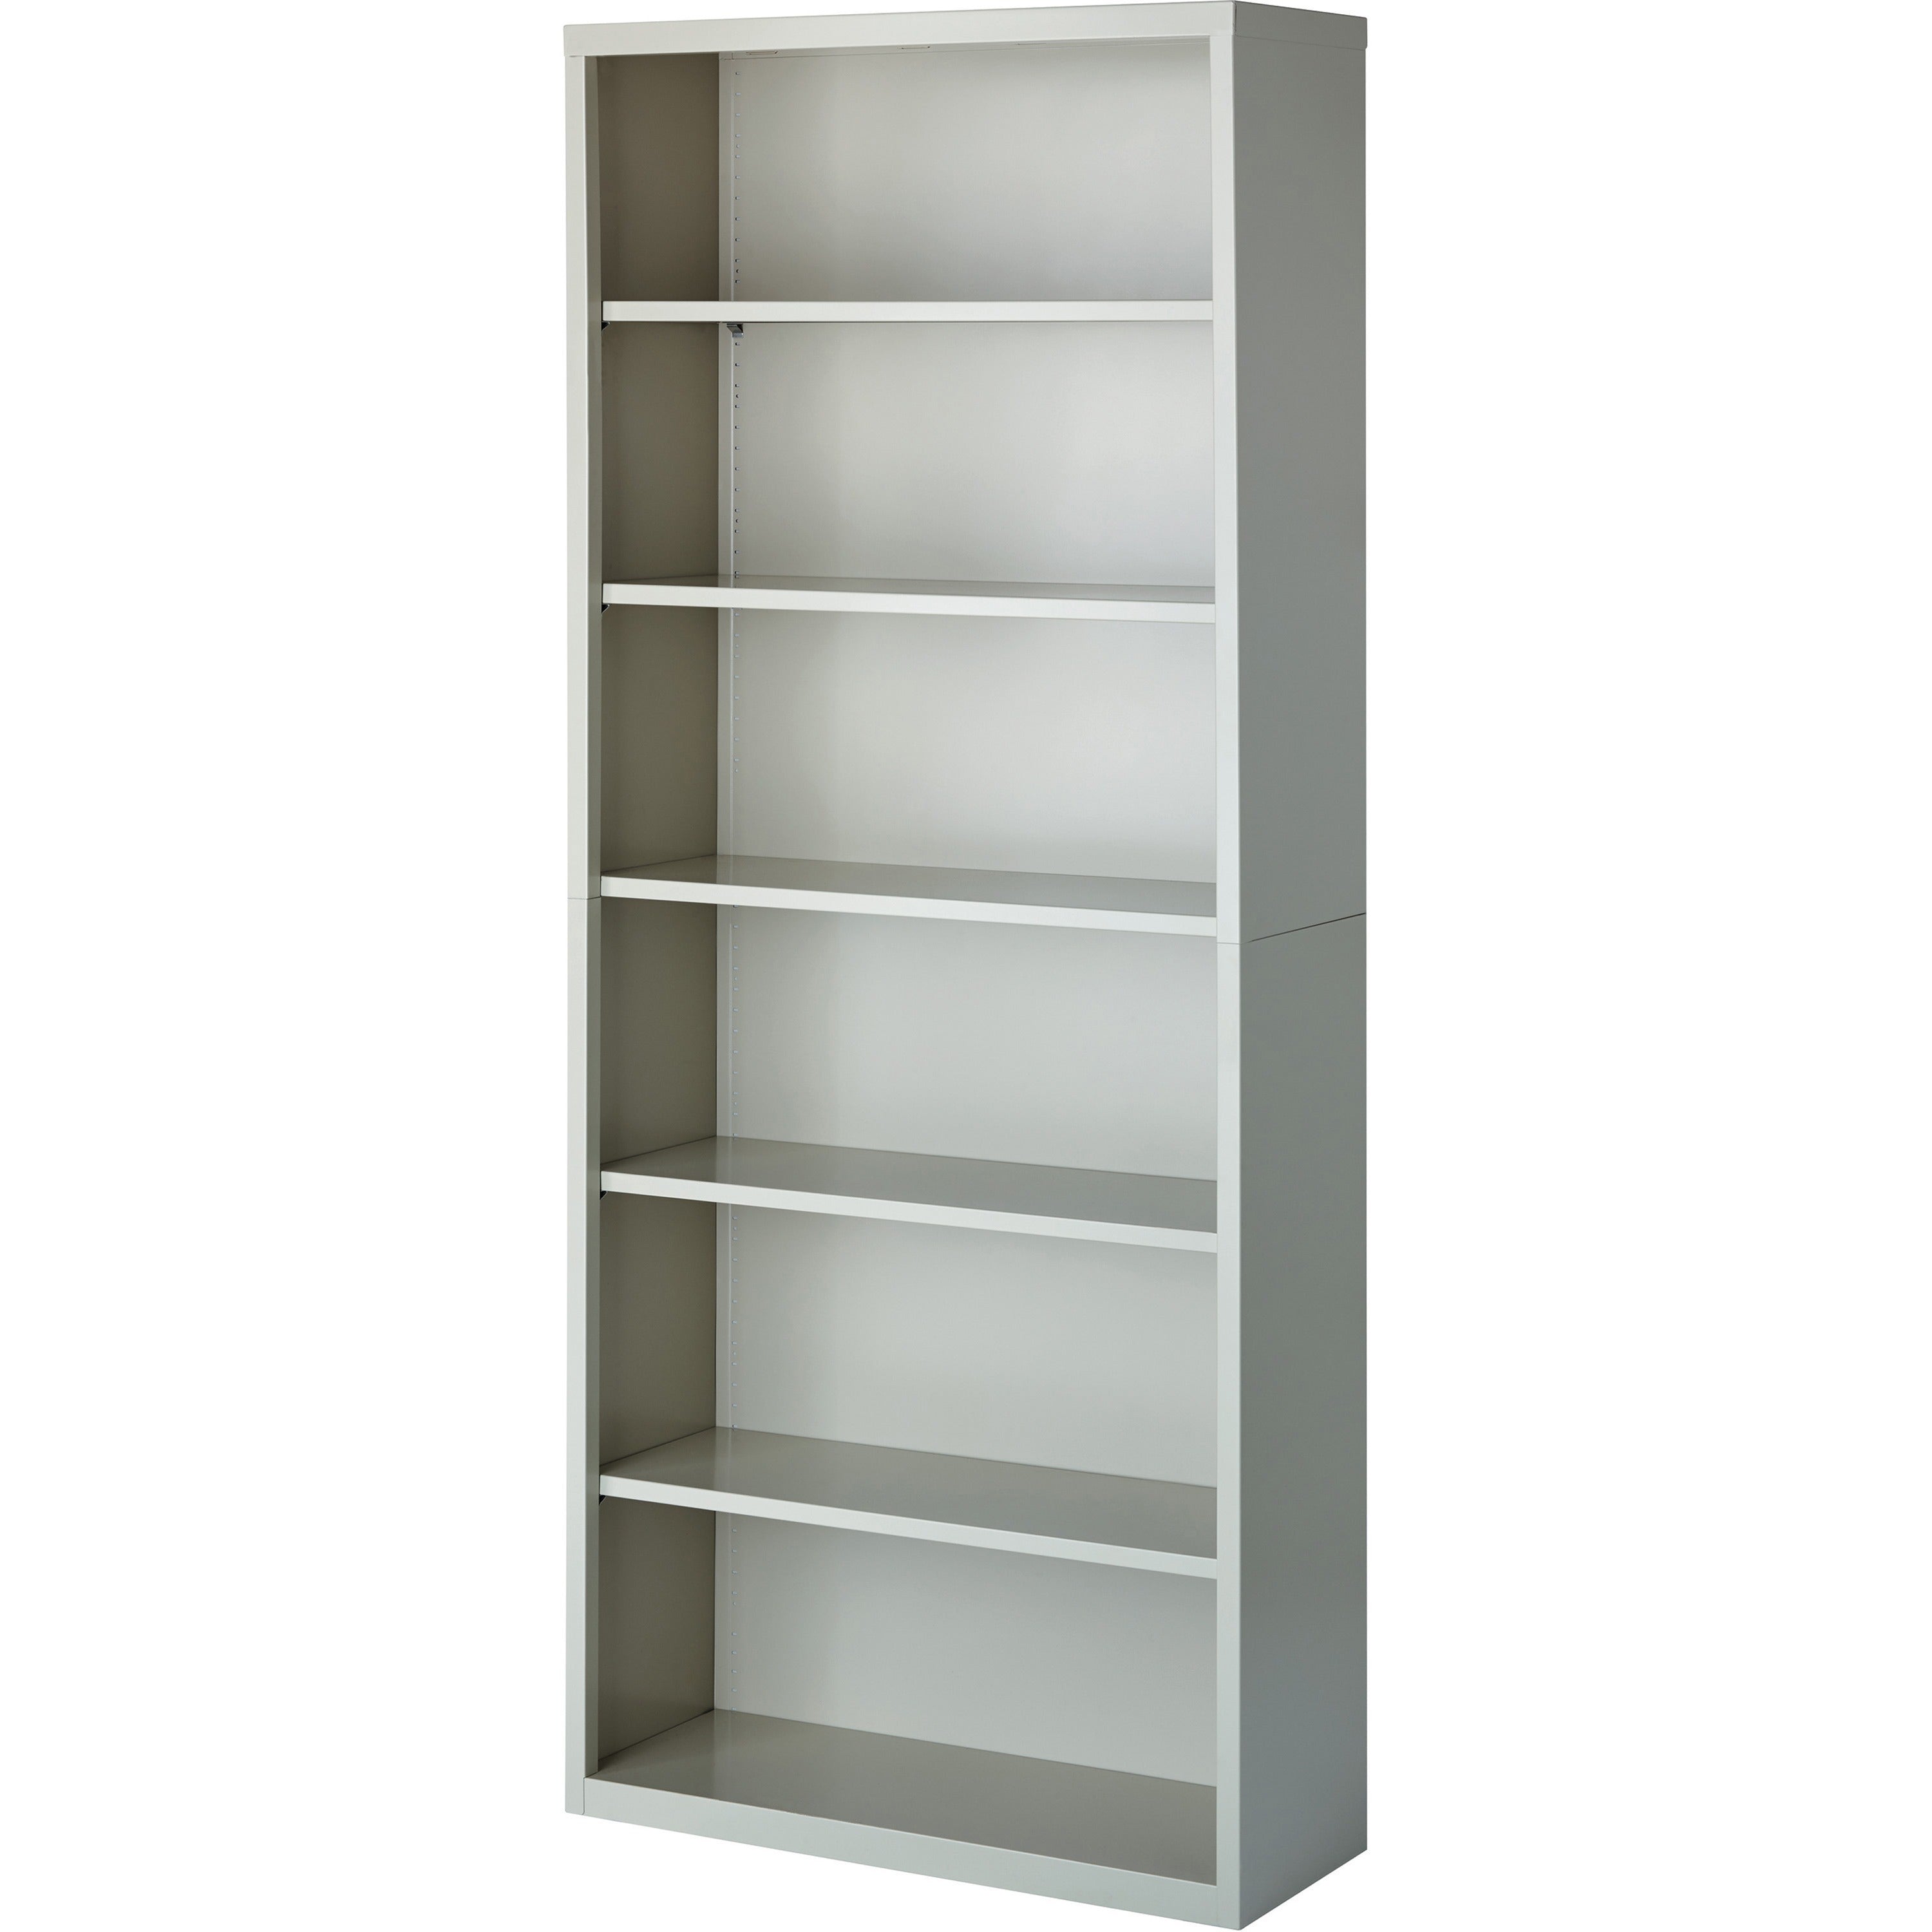 Lorell Fortress Series Bookcase - 34.5" x 13" x 82" - 6 x Shelf(ves) - Light Gray - Powder Coated - Steel - Recycled - Assembly Required - 